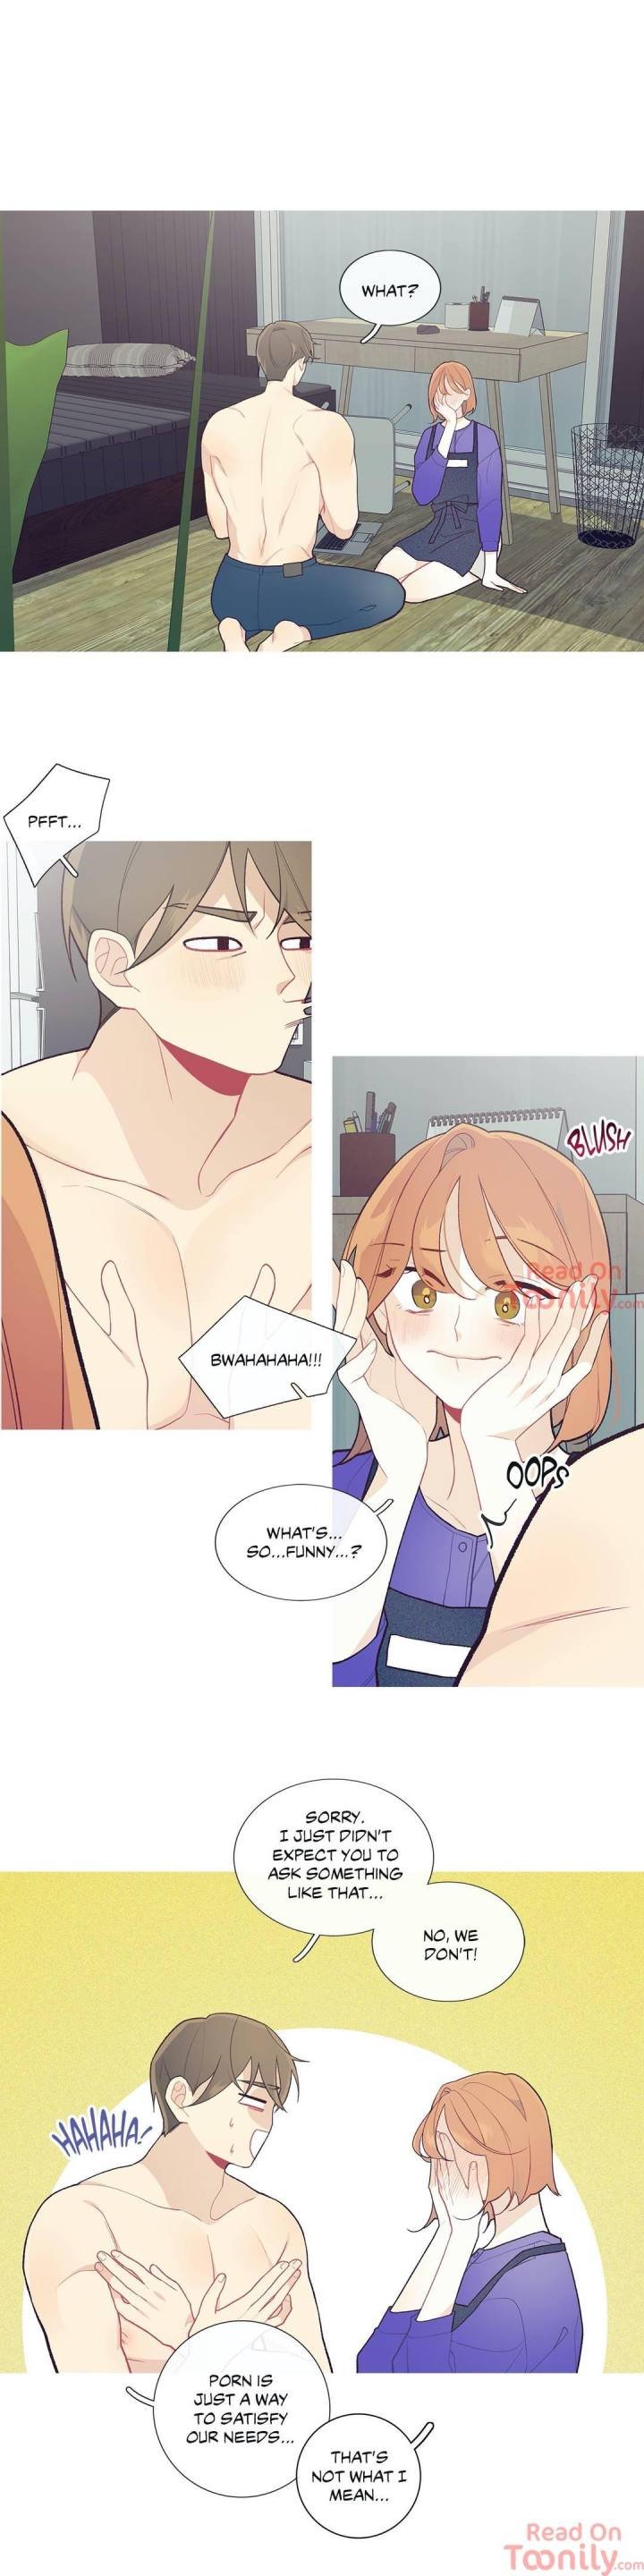 whats-going-on-chap-42-5